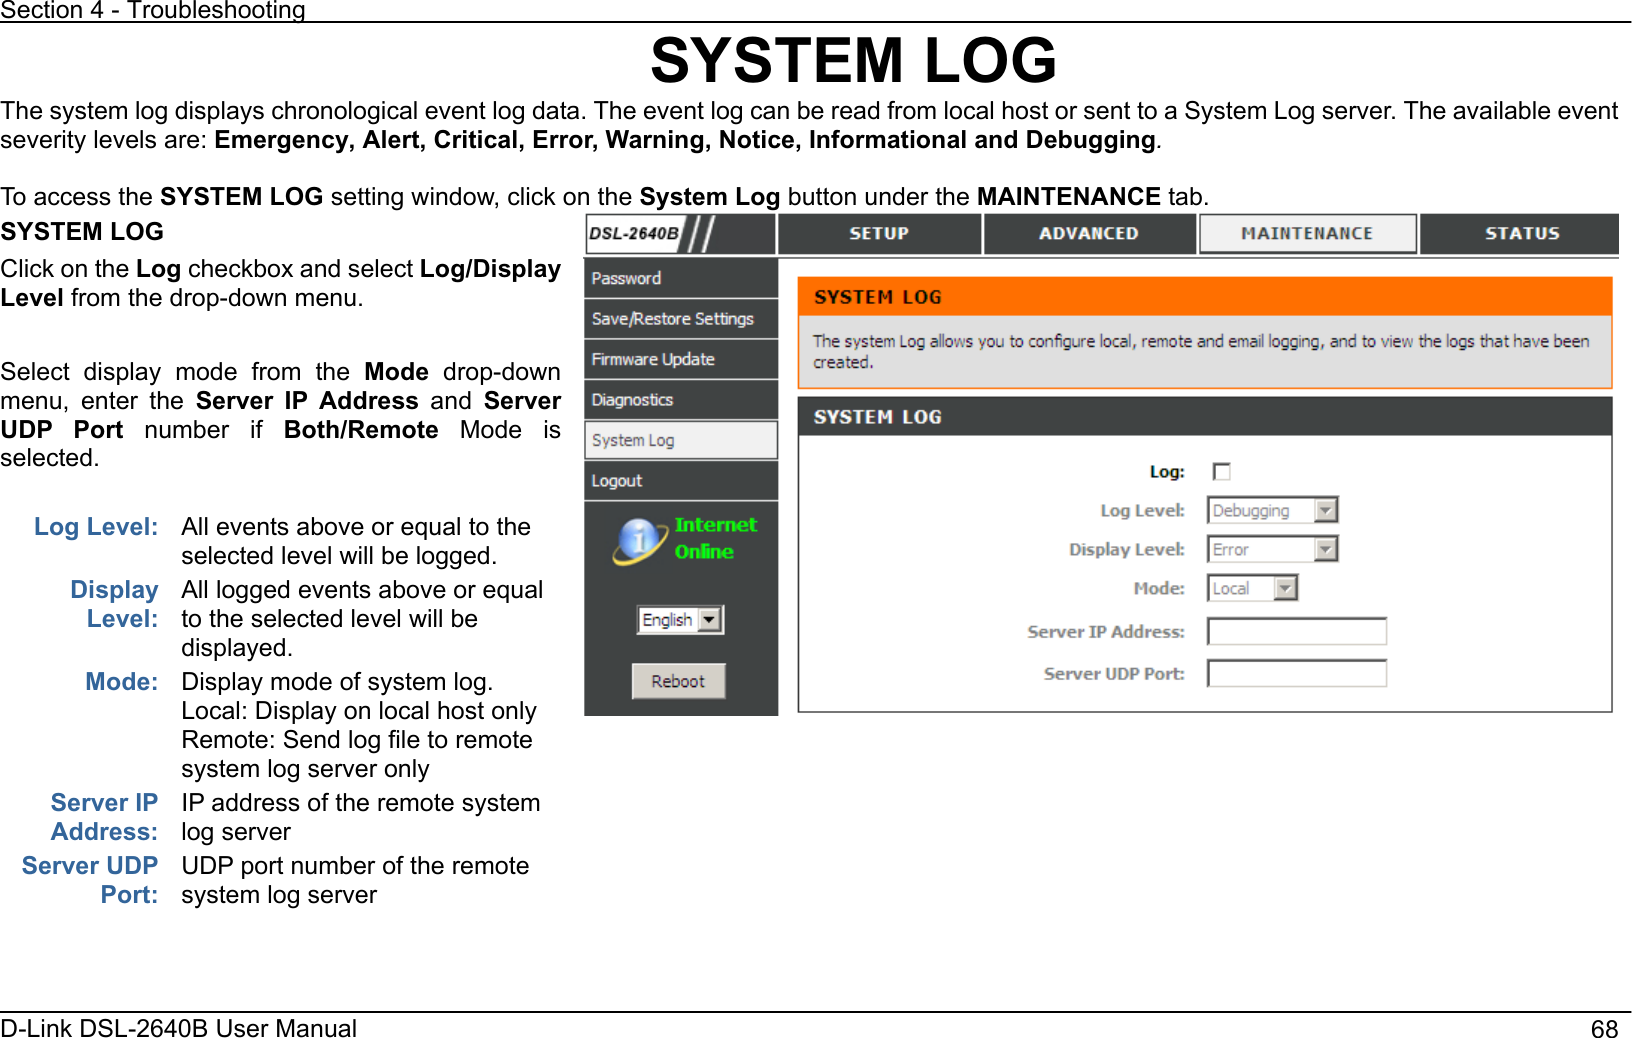 Section 4 - Troubleshooting D-Link DSL-2640B User Manual                                       68SYSTEM LOG The system log displays chronological event log data. The event log can be read from local host or sent to a System Log server. The available event severity levels are: Emergency, Alert, Critical, Error, Warning, Notice, Informational and Debugging.To access the SYSTEM LOG setting window, click on the System Log button under the MAINTENANCE tab.SYSTEM LOG Click on the Log checkbox and select Log/Display Level from the drop-down menu. Select display mode from the Mode drop-down menu, enter the Server IP Address and ServerUDP Port number if Both/Remote Mode is selected.Log Level:  All events above or equal to the selected level will be logged. Display Level:All logged events above or equal to the selected level will be displayed. Display mode of system log. Local: Display on local host only Remote: Send log file to remote system log server only Mode:Server IP Address:IP address of the remote system log server   Server UDP Port:UDP port number of the remote system log server 